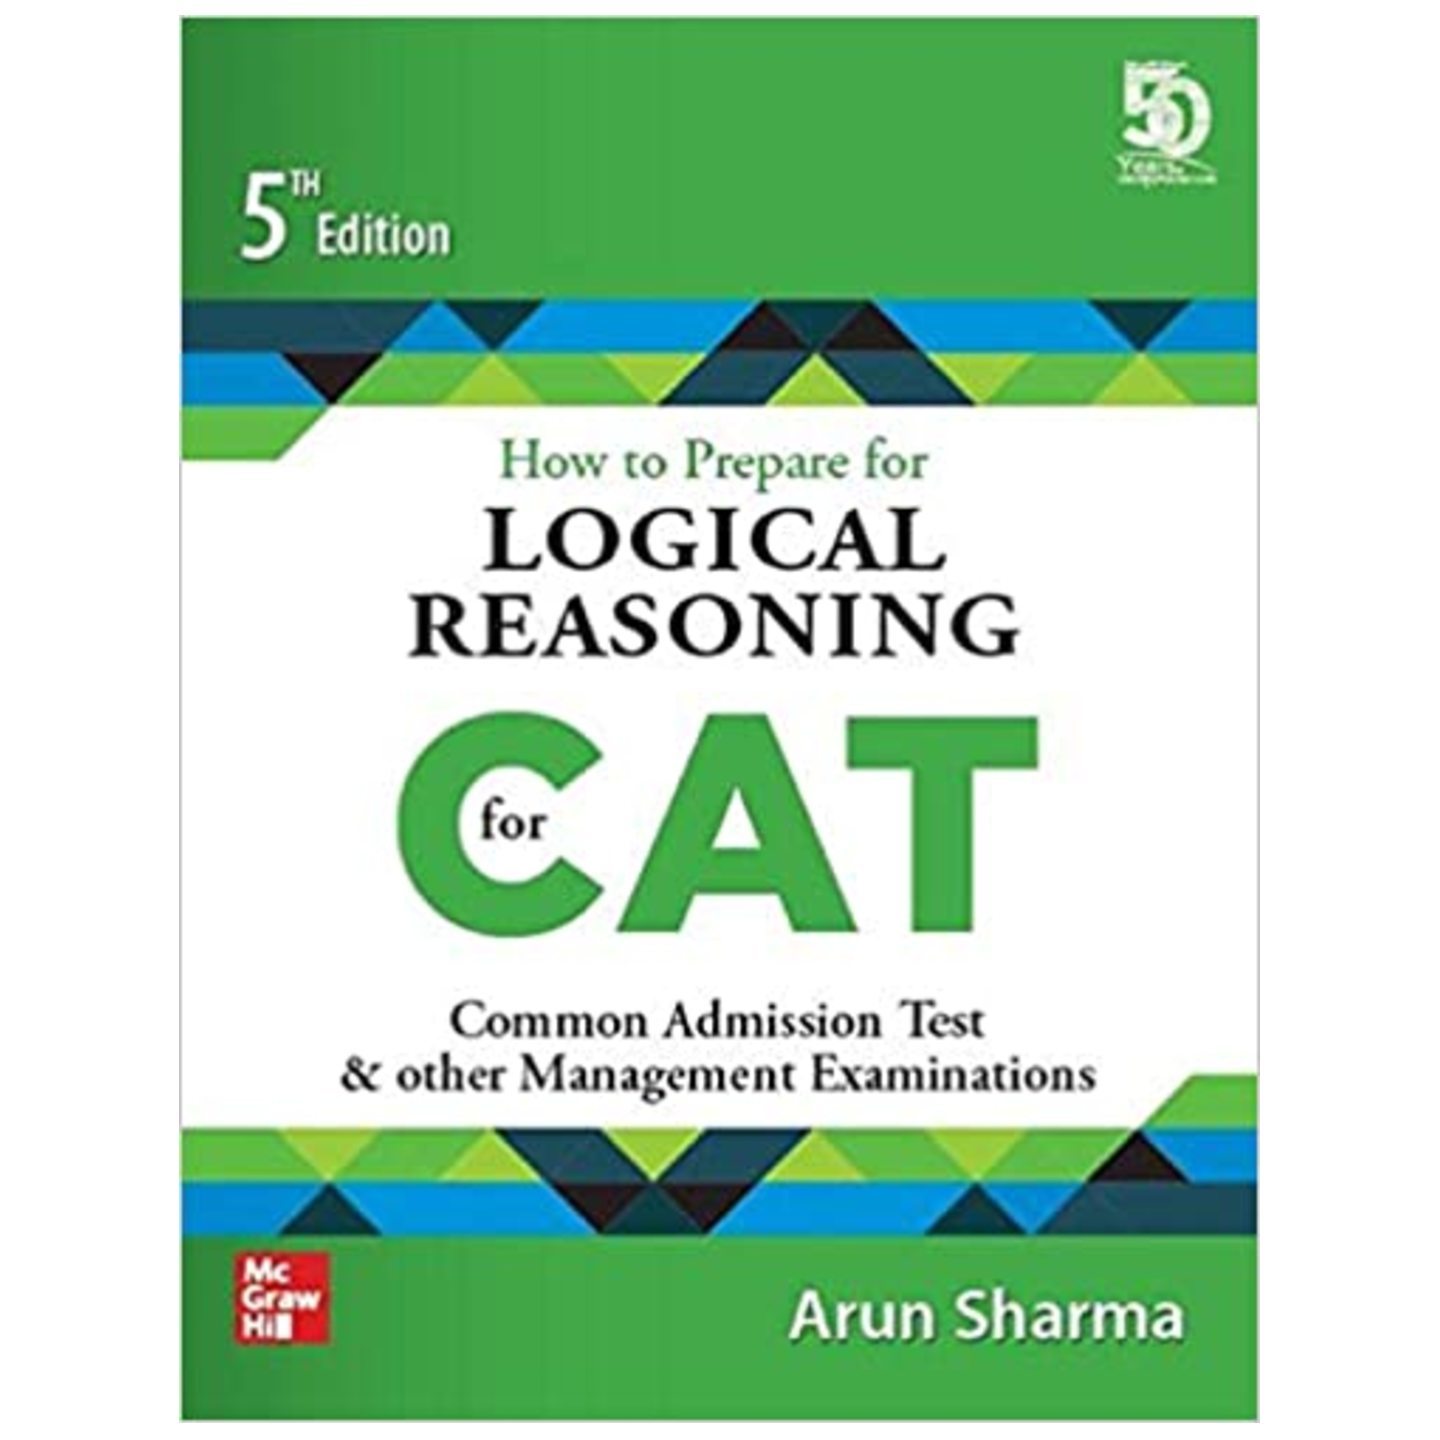 MC GRAW HILL How to Prepare for Logical Reasoning for CAT ARUN SHARMA